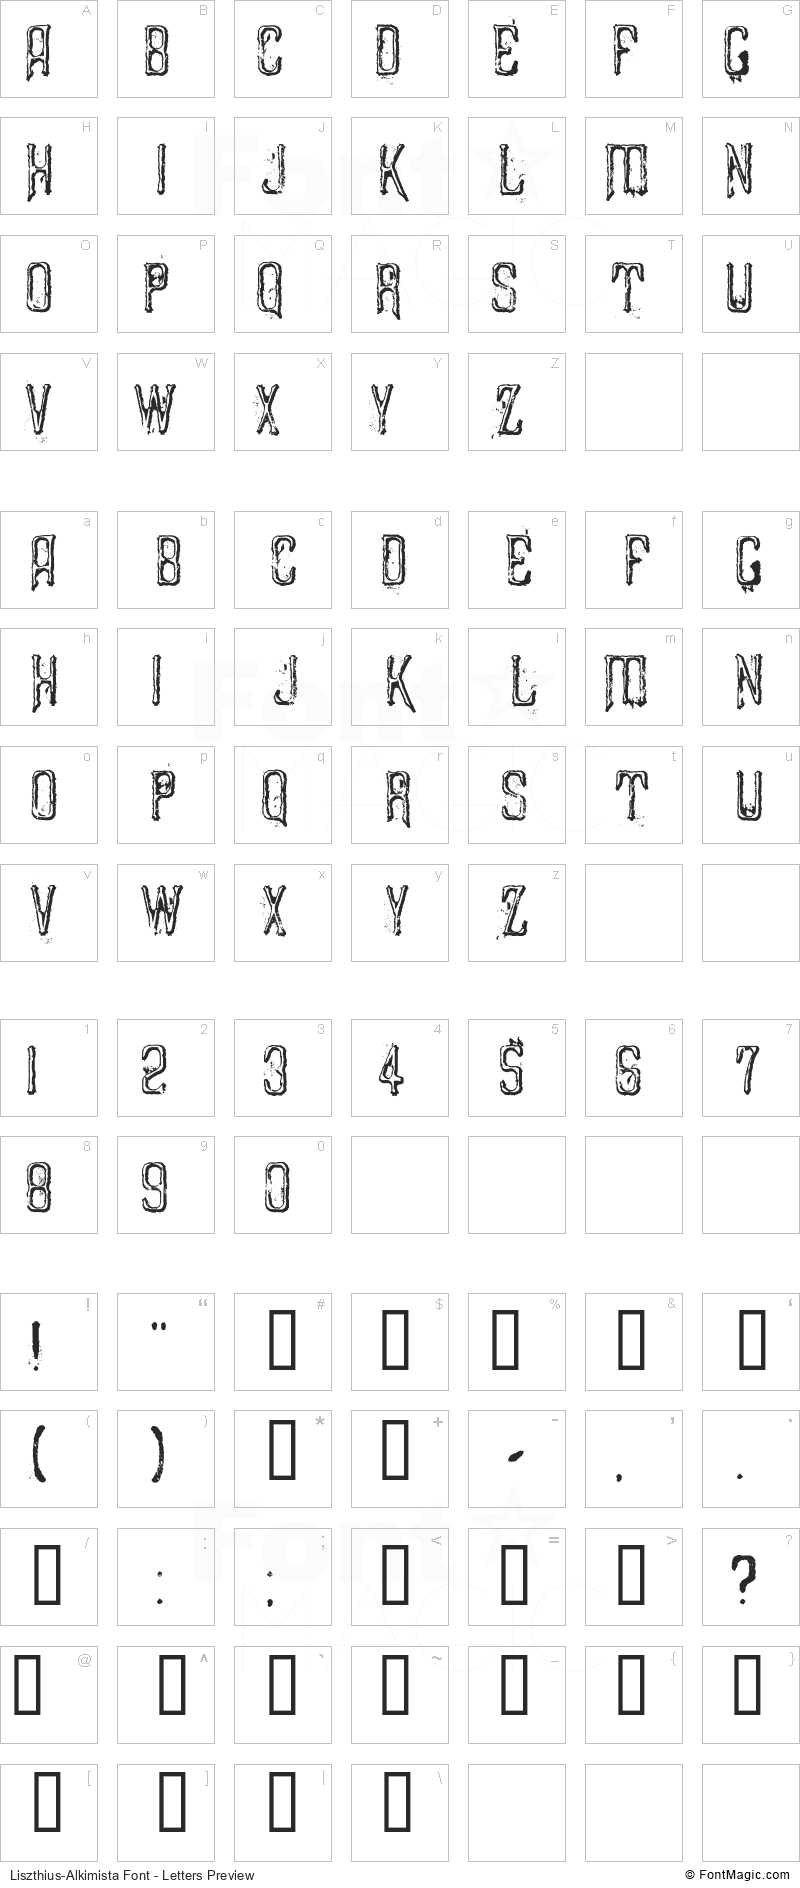 Liszthius-Alkimista Font - All Latters Preview Chart